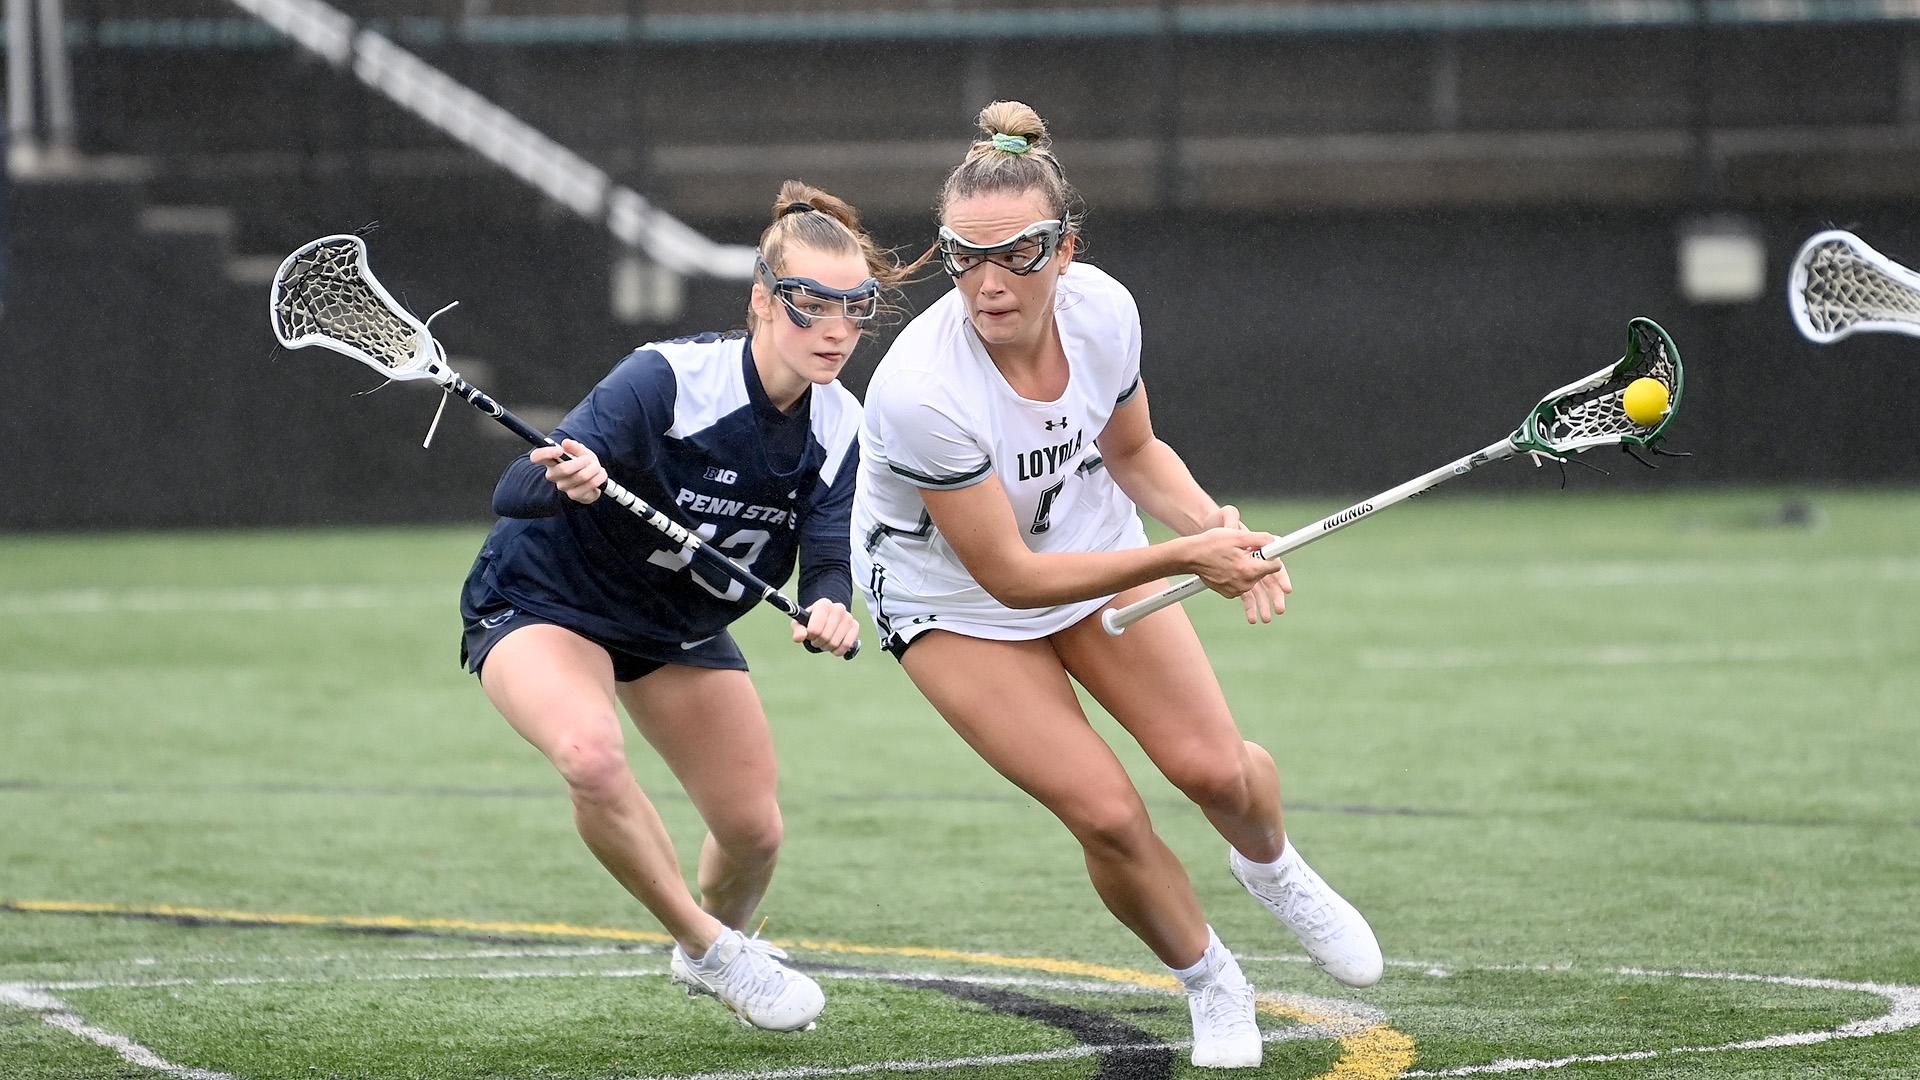 Boyle, Johnson, Smart are USA Lacrosse Women's Players of the Week ...